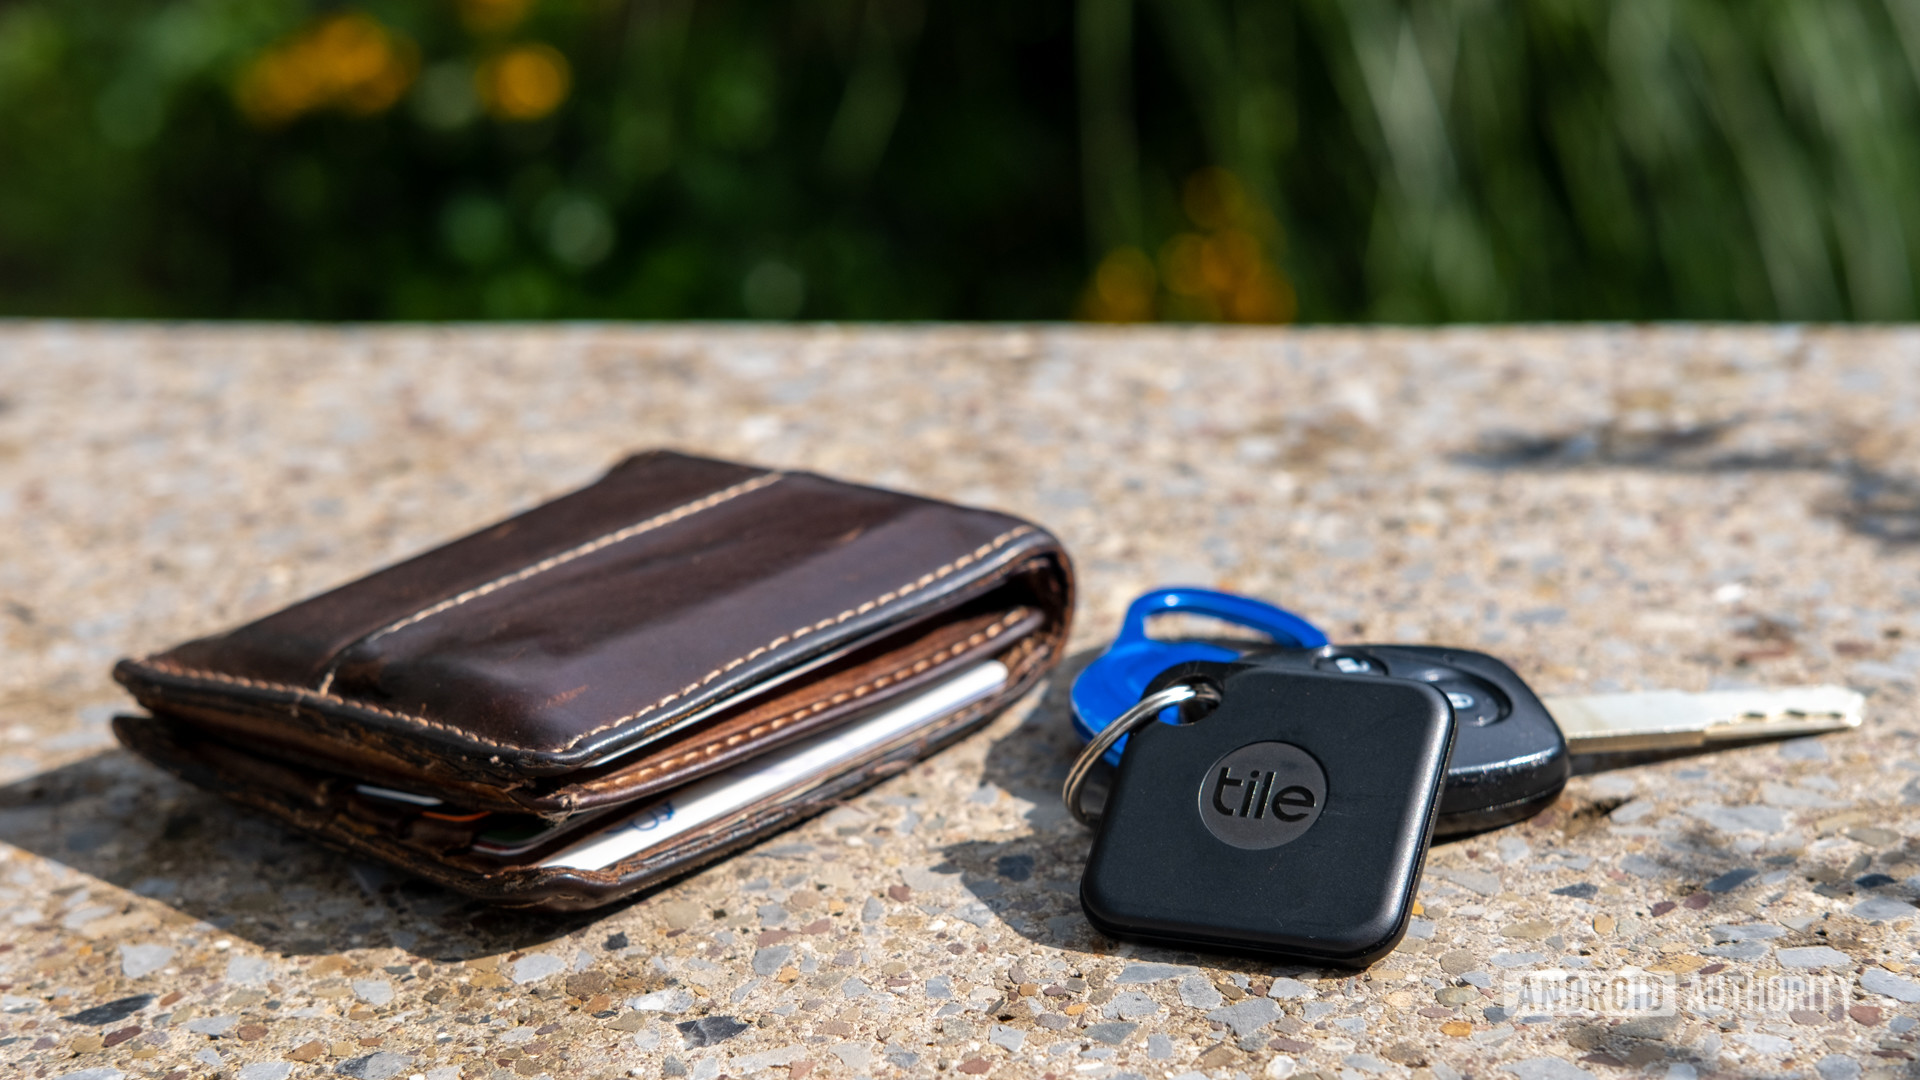 Tile Pro on a keyring next to a wallet